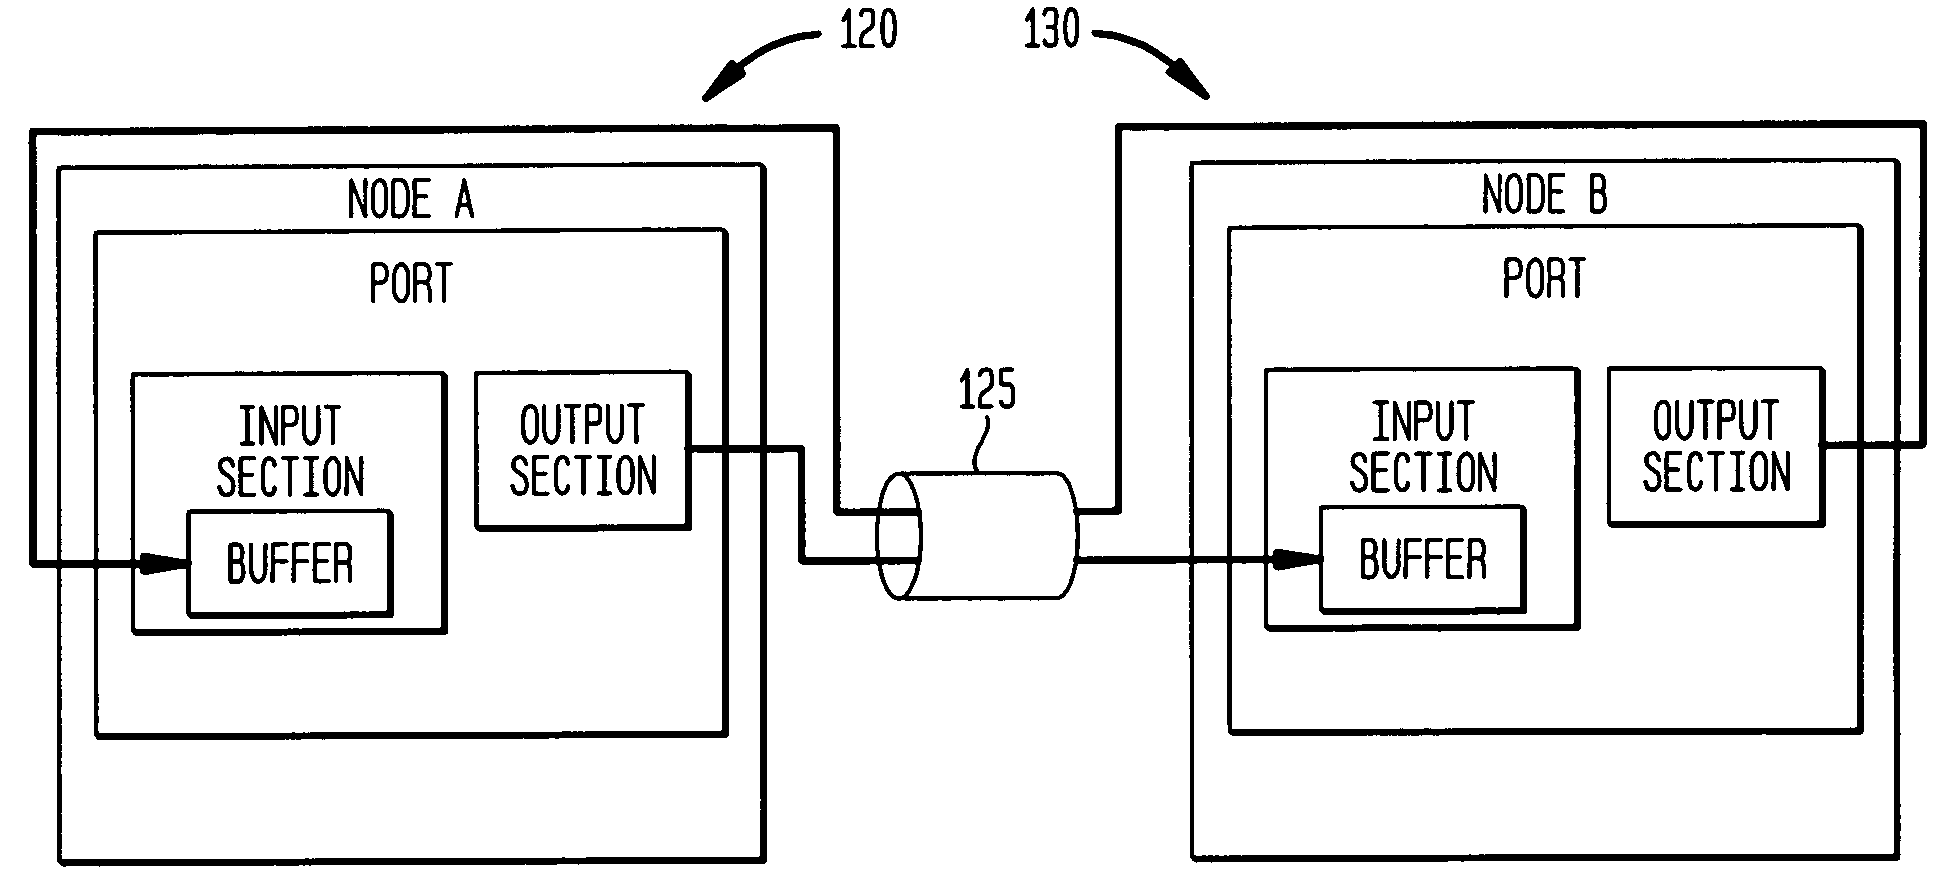 Digital data system with link level message flow control